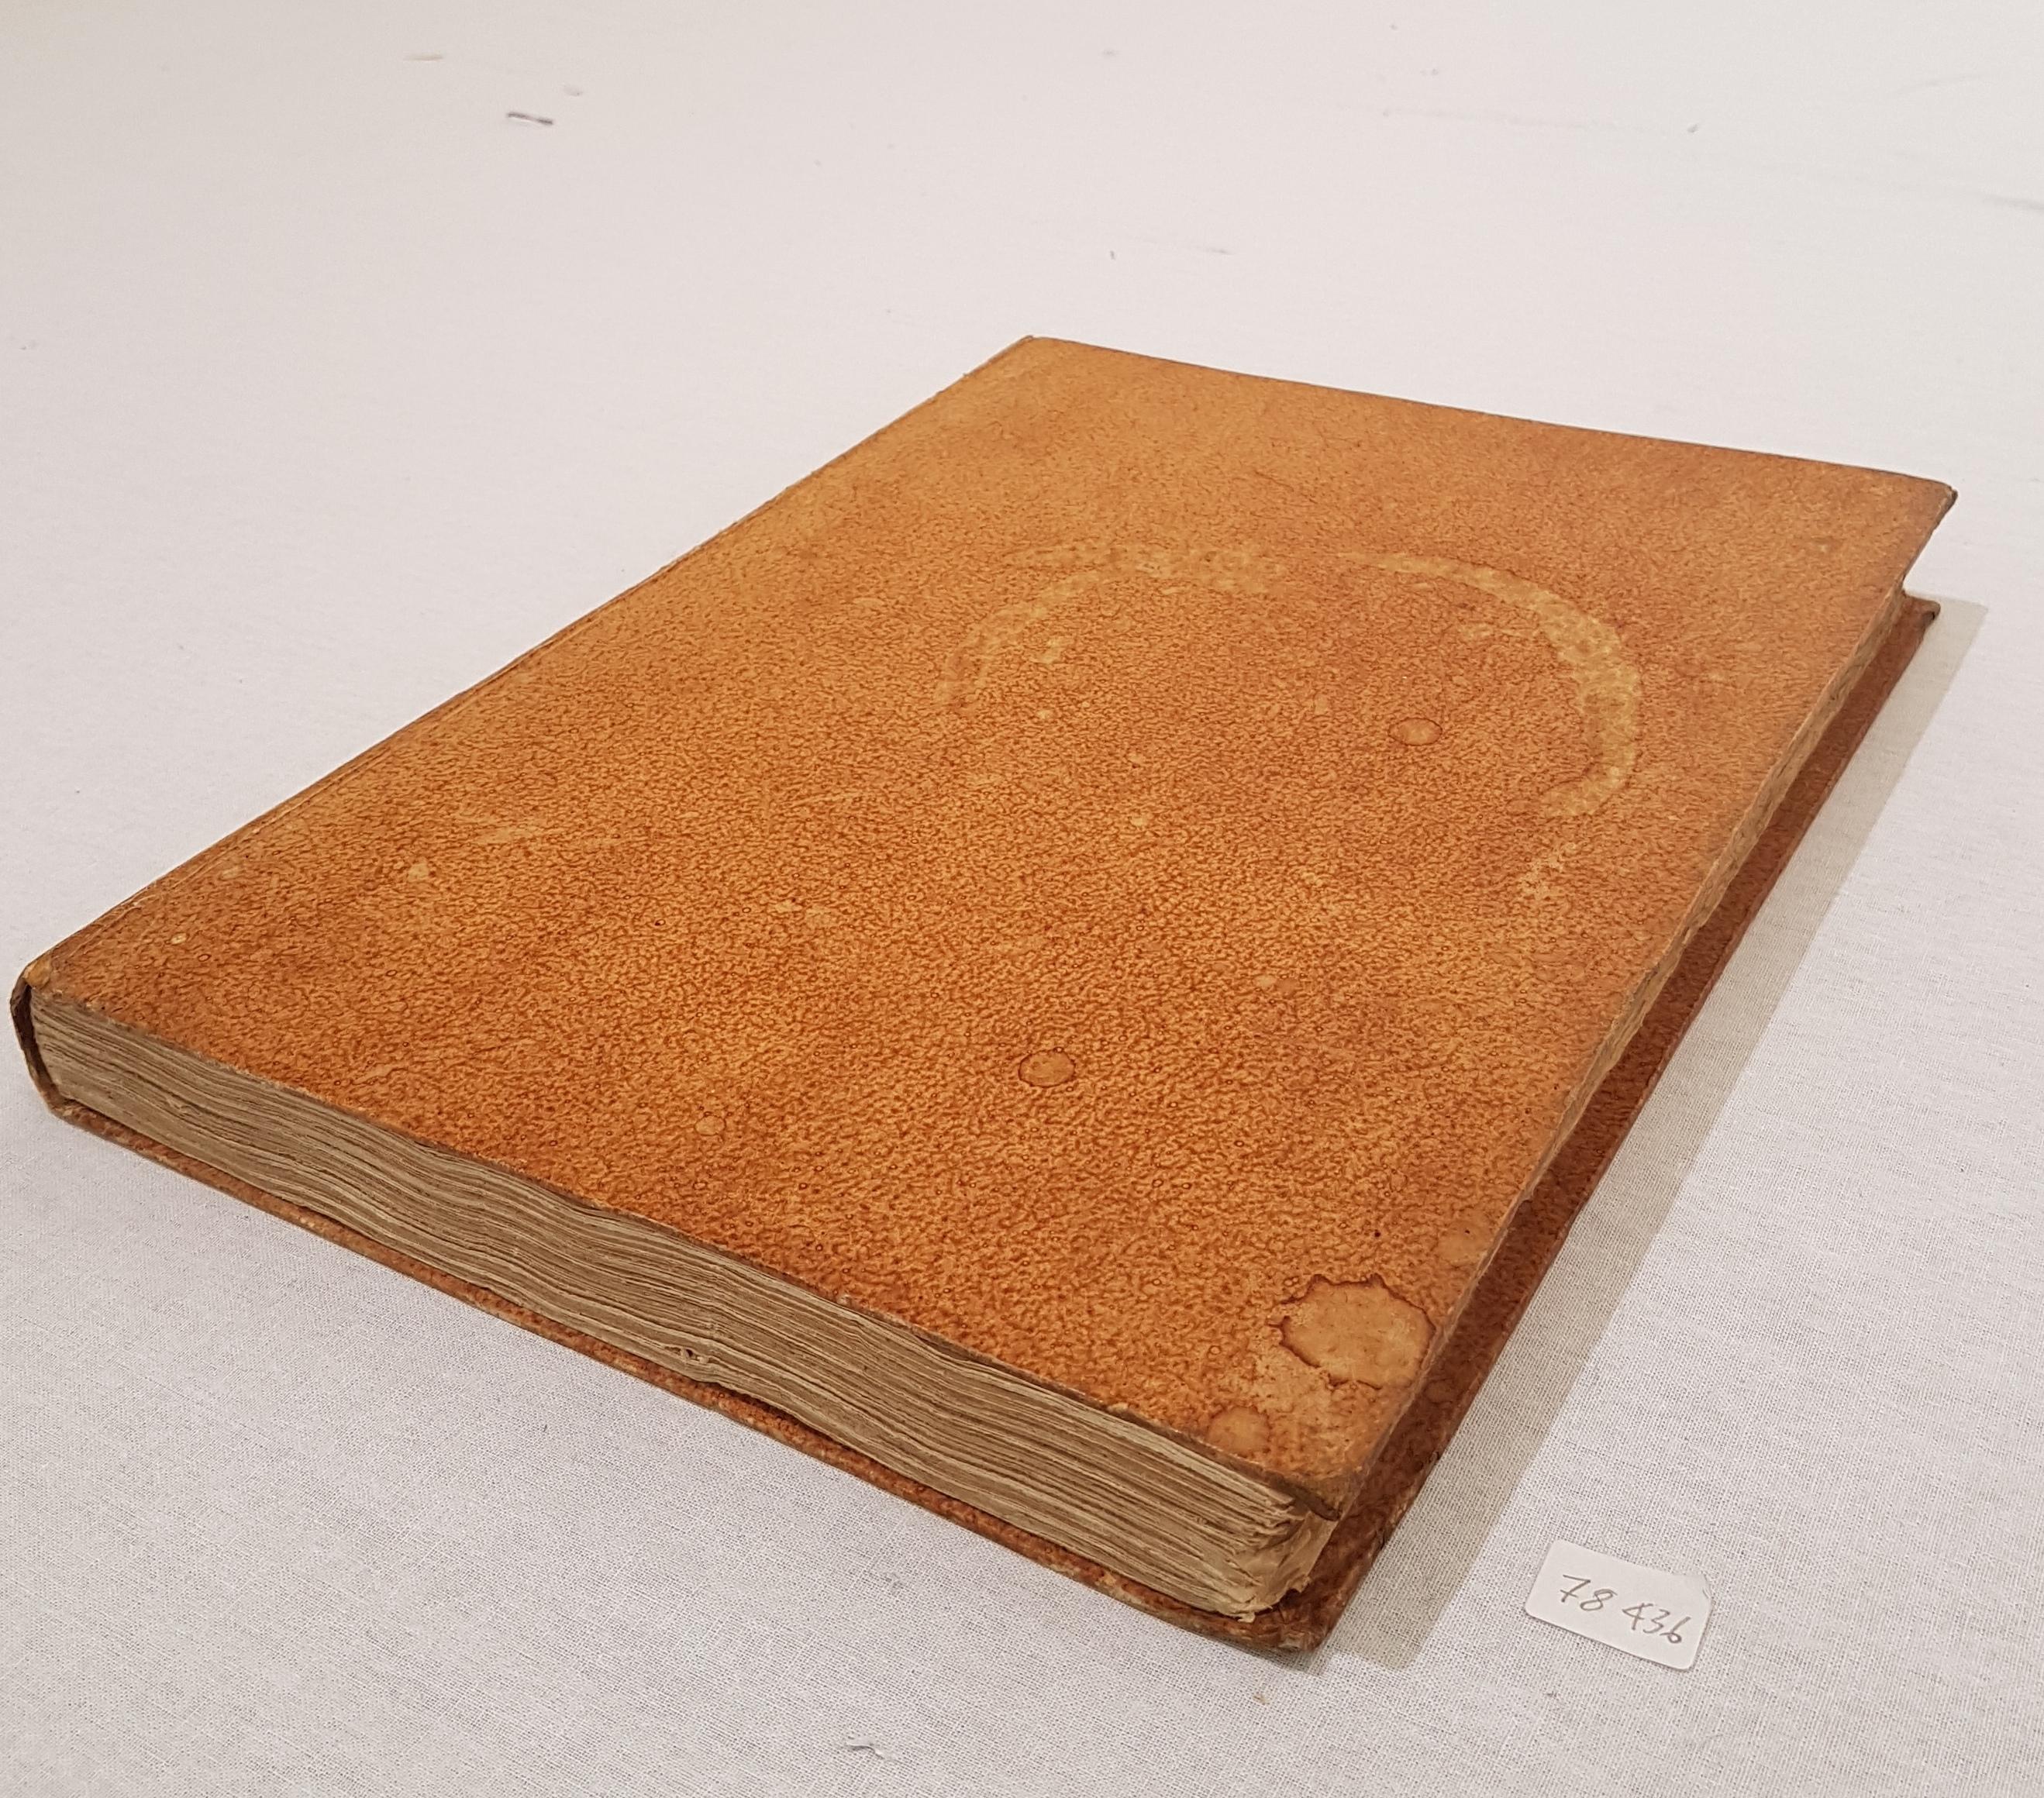 Rare and precious lifetime edition published by the Venetian publisher Picotti in 1817.
Pages: 223 + 17 not numbered.
In-4° with editorial binding and original 